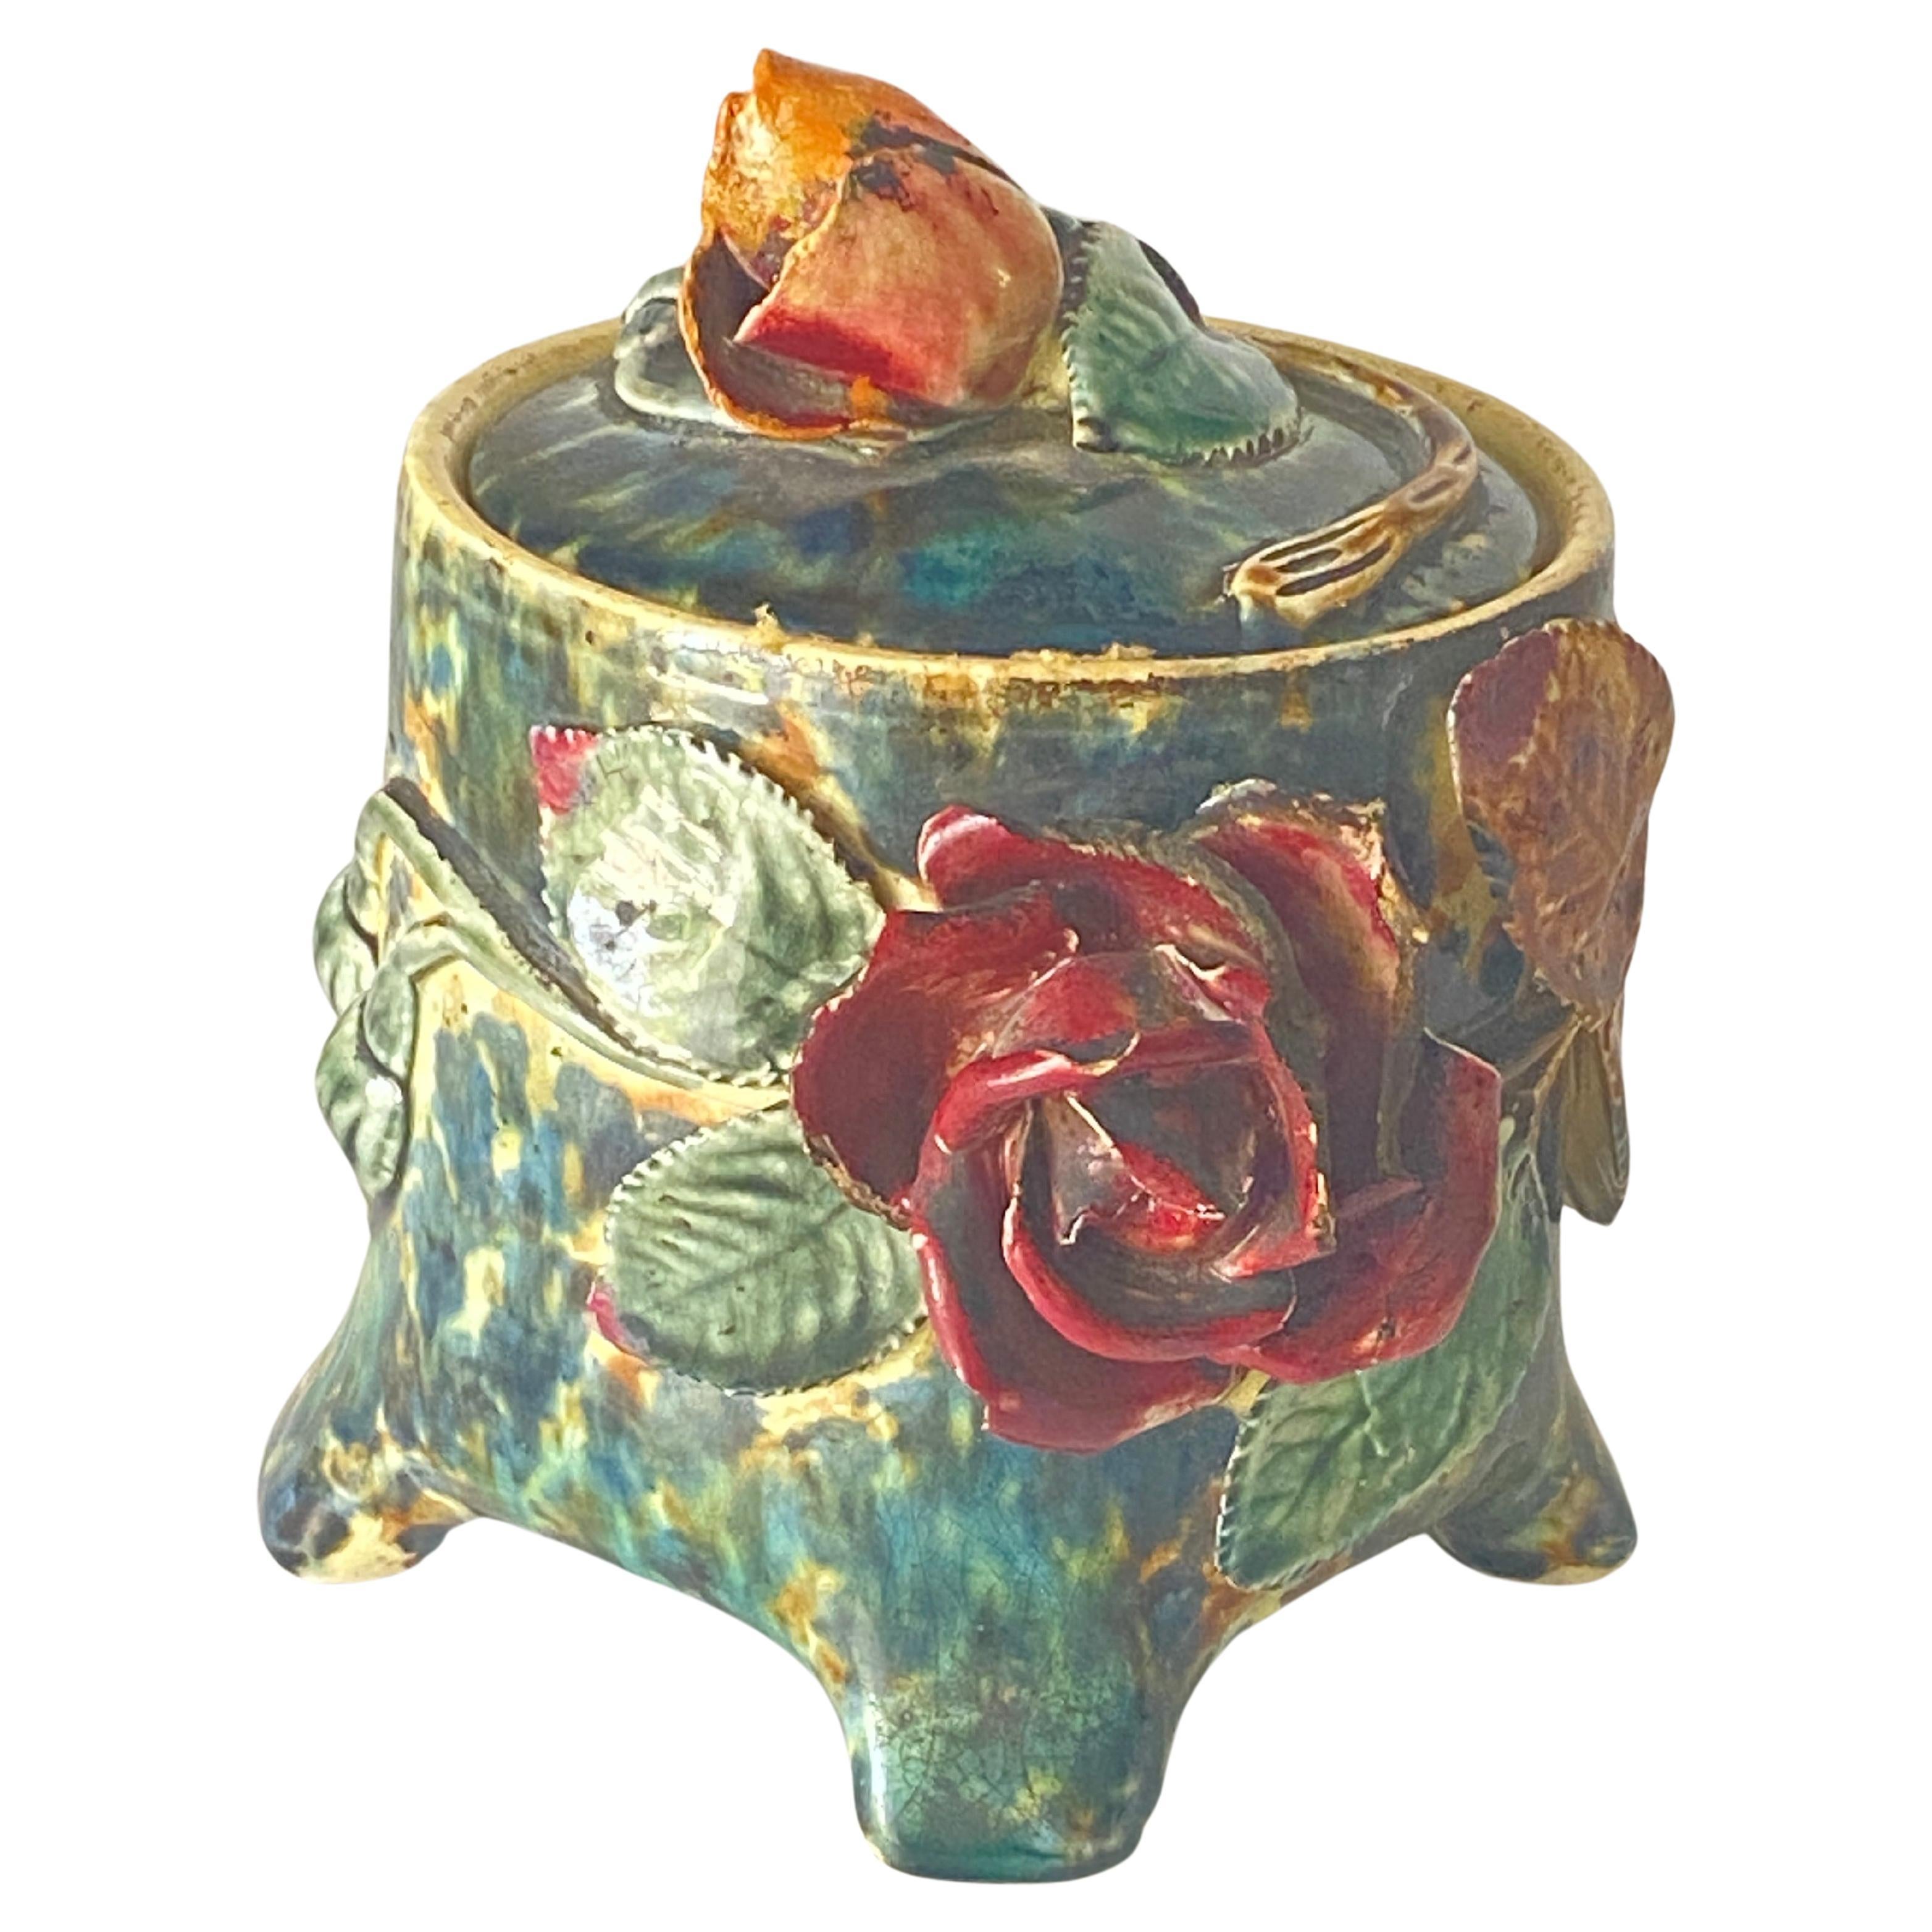 Tabacco box, Pot in Majolica with brass. Leaf Decor pattern. Brown Green and Red color.
It has been made in France circa 19th century.